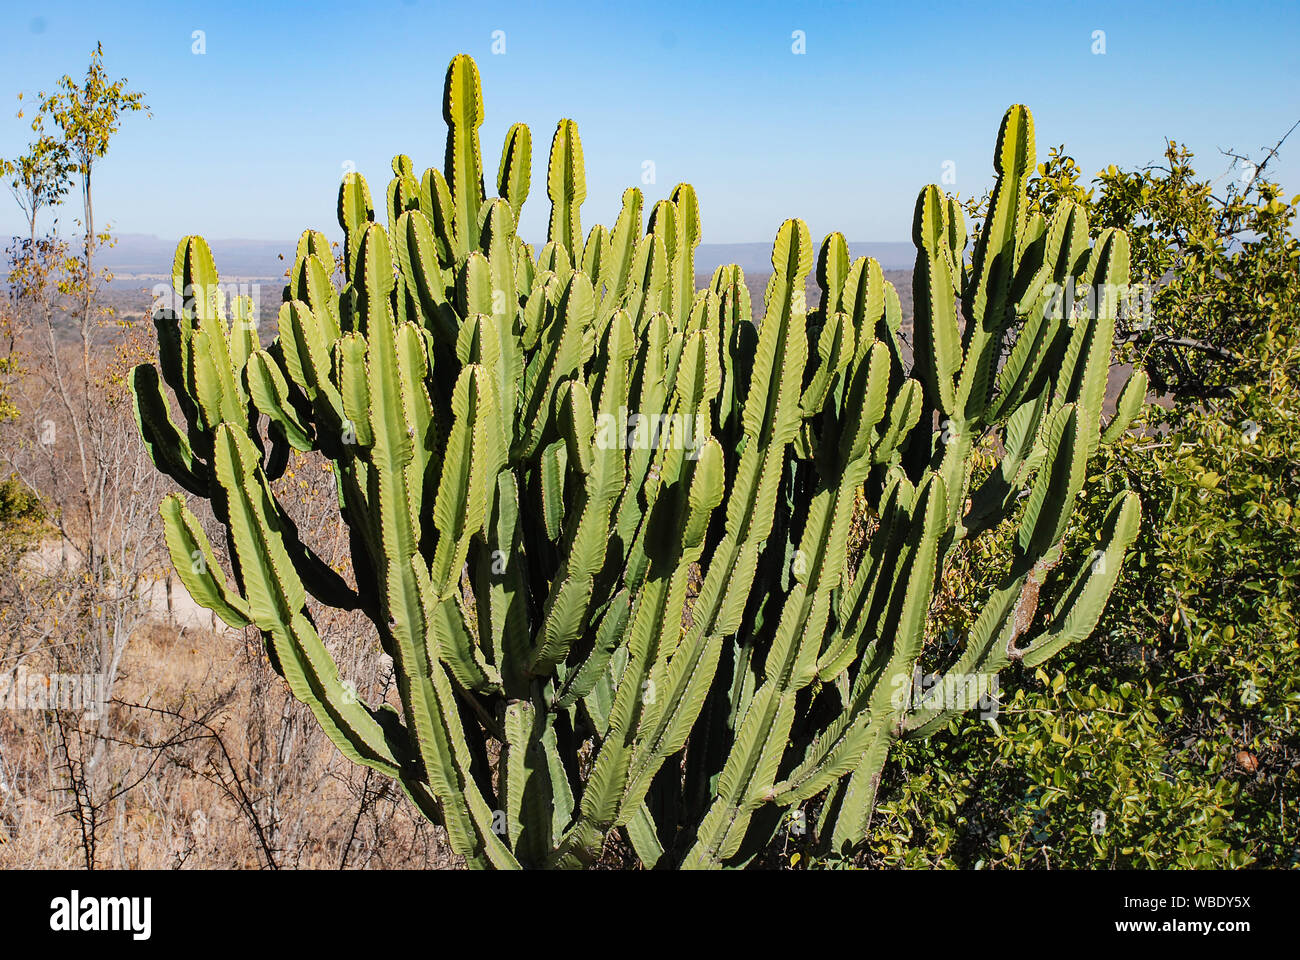 A Candleabra Tree (Euphorbia ingens) in South Africa Stock Photo